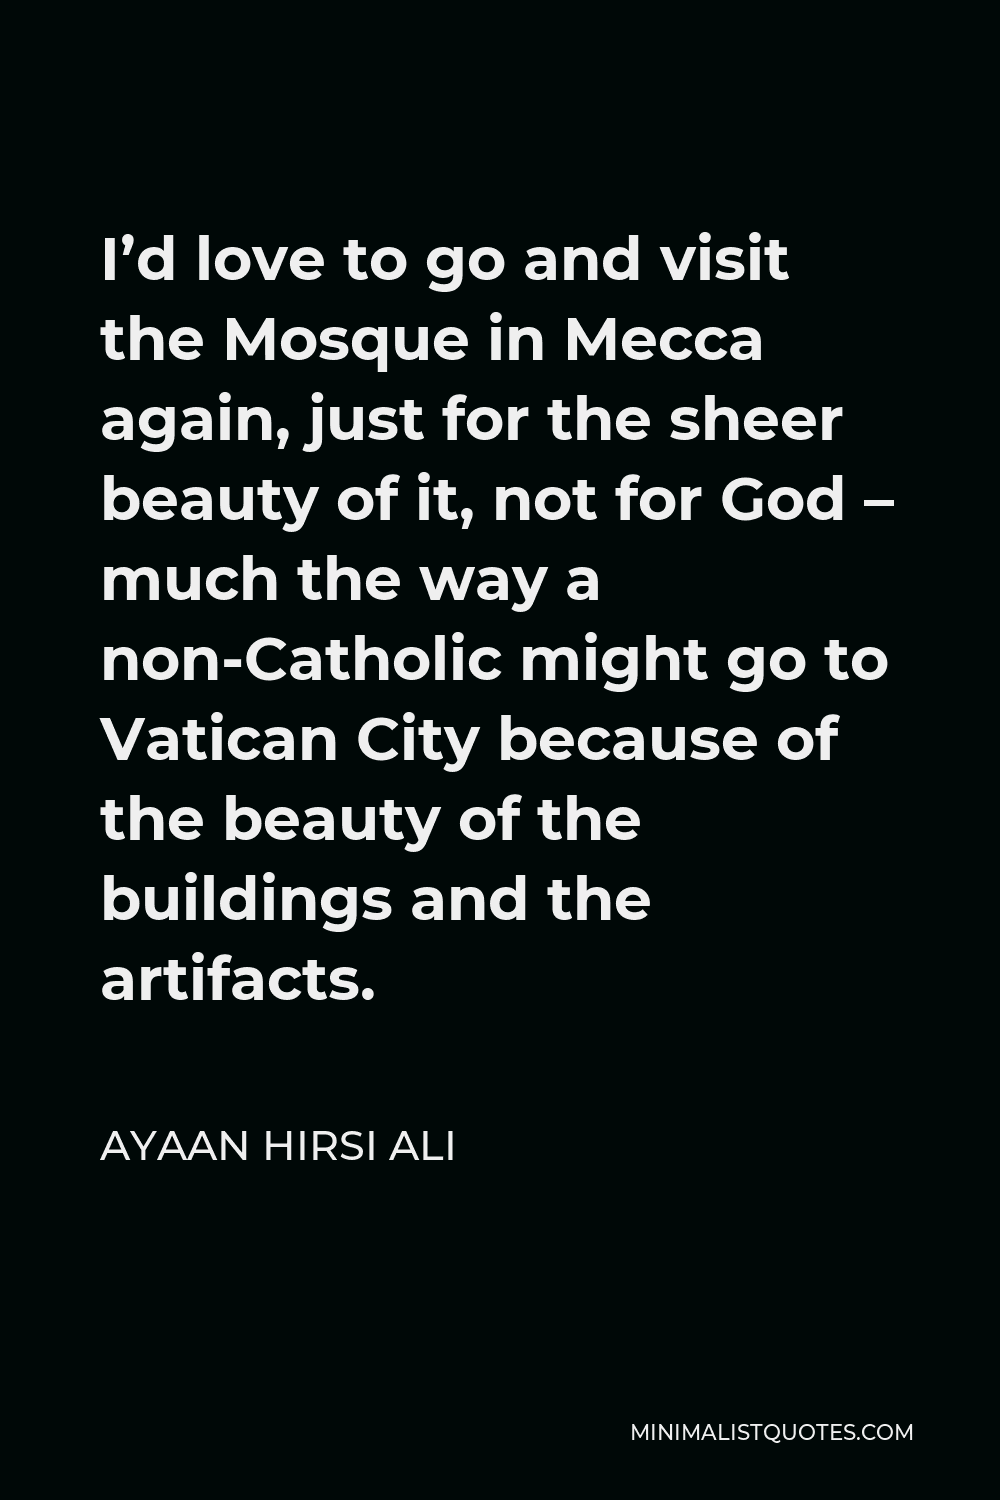 Ayaan Hirsi Ali Quote - I’d love to go and visit the Mosque in Mecca again, just for the sheer beauty of it, not for God – much the way a non-Catholic might go to Vatican City because of the beauty of the buildings and the artifacts.